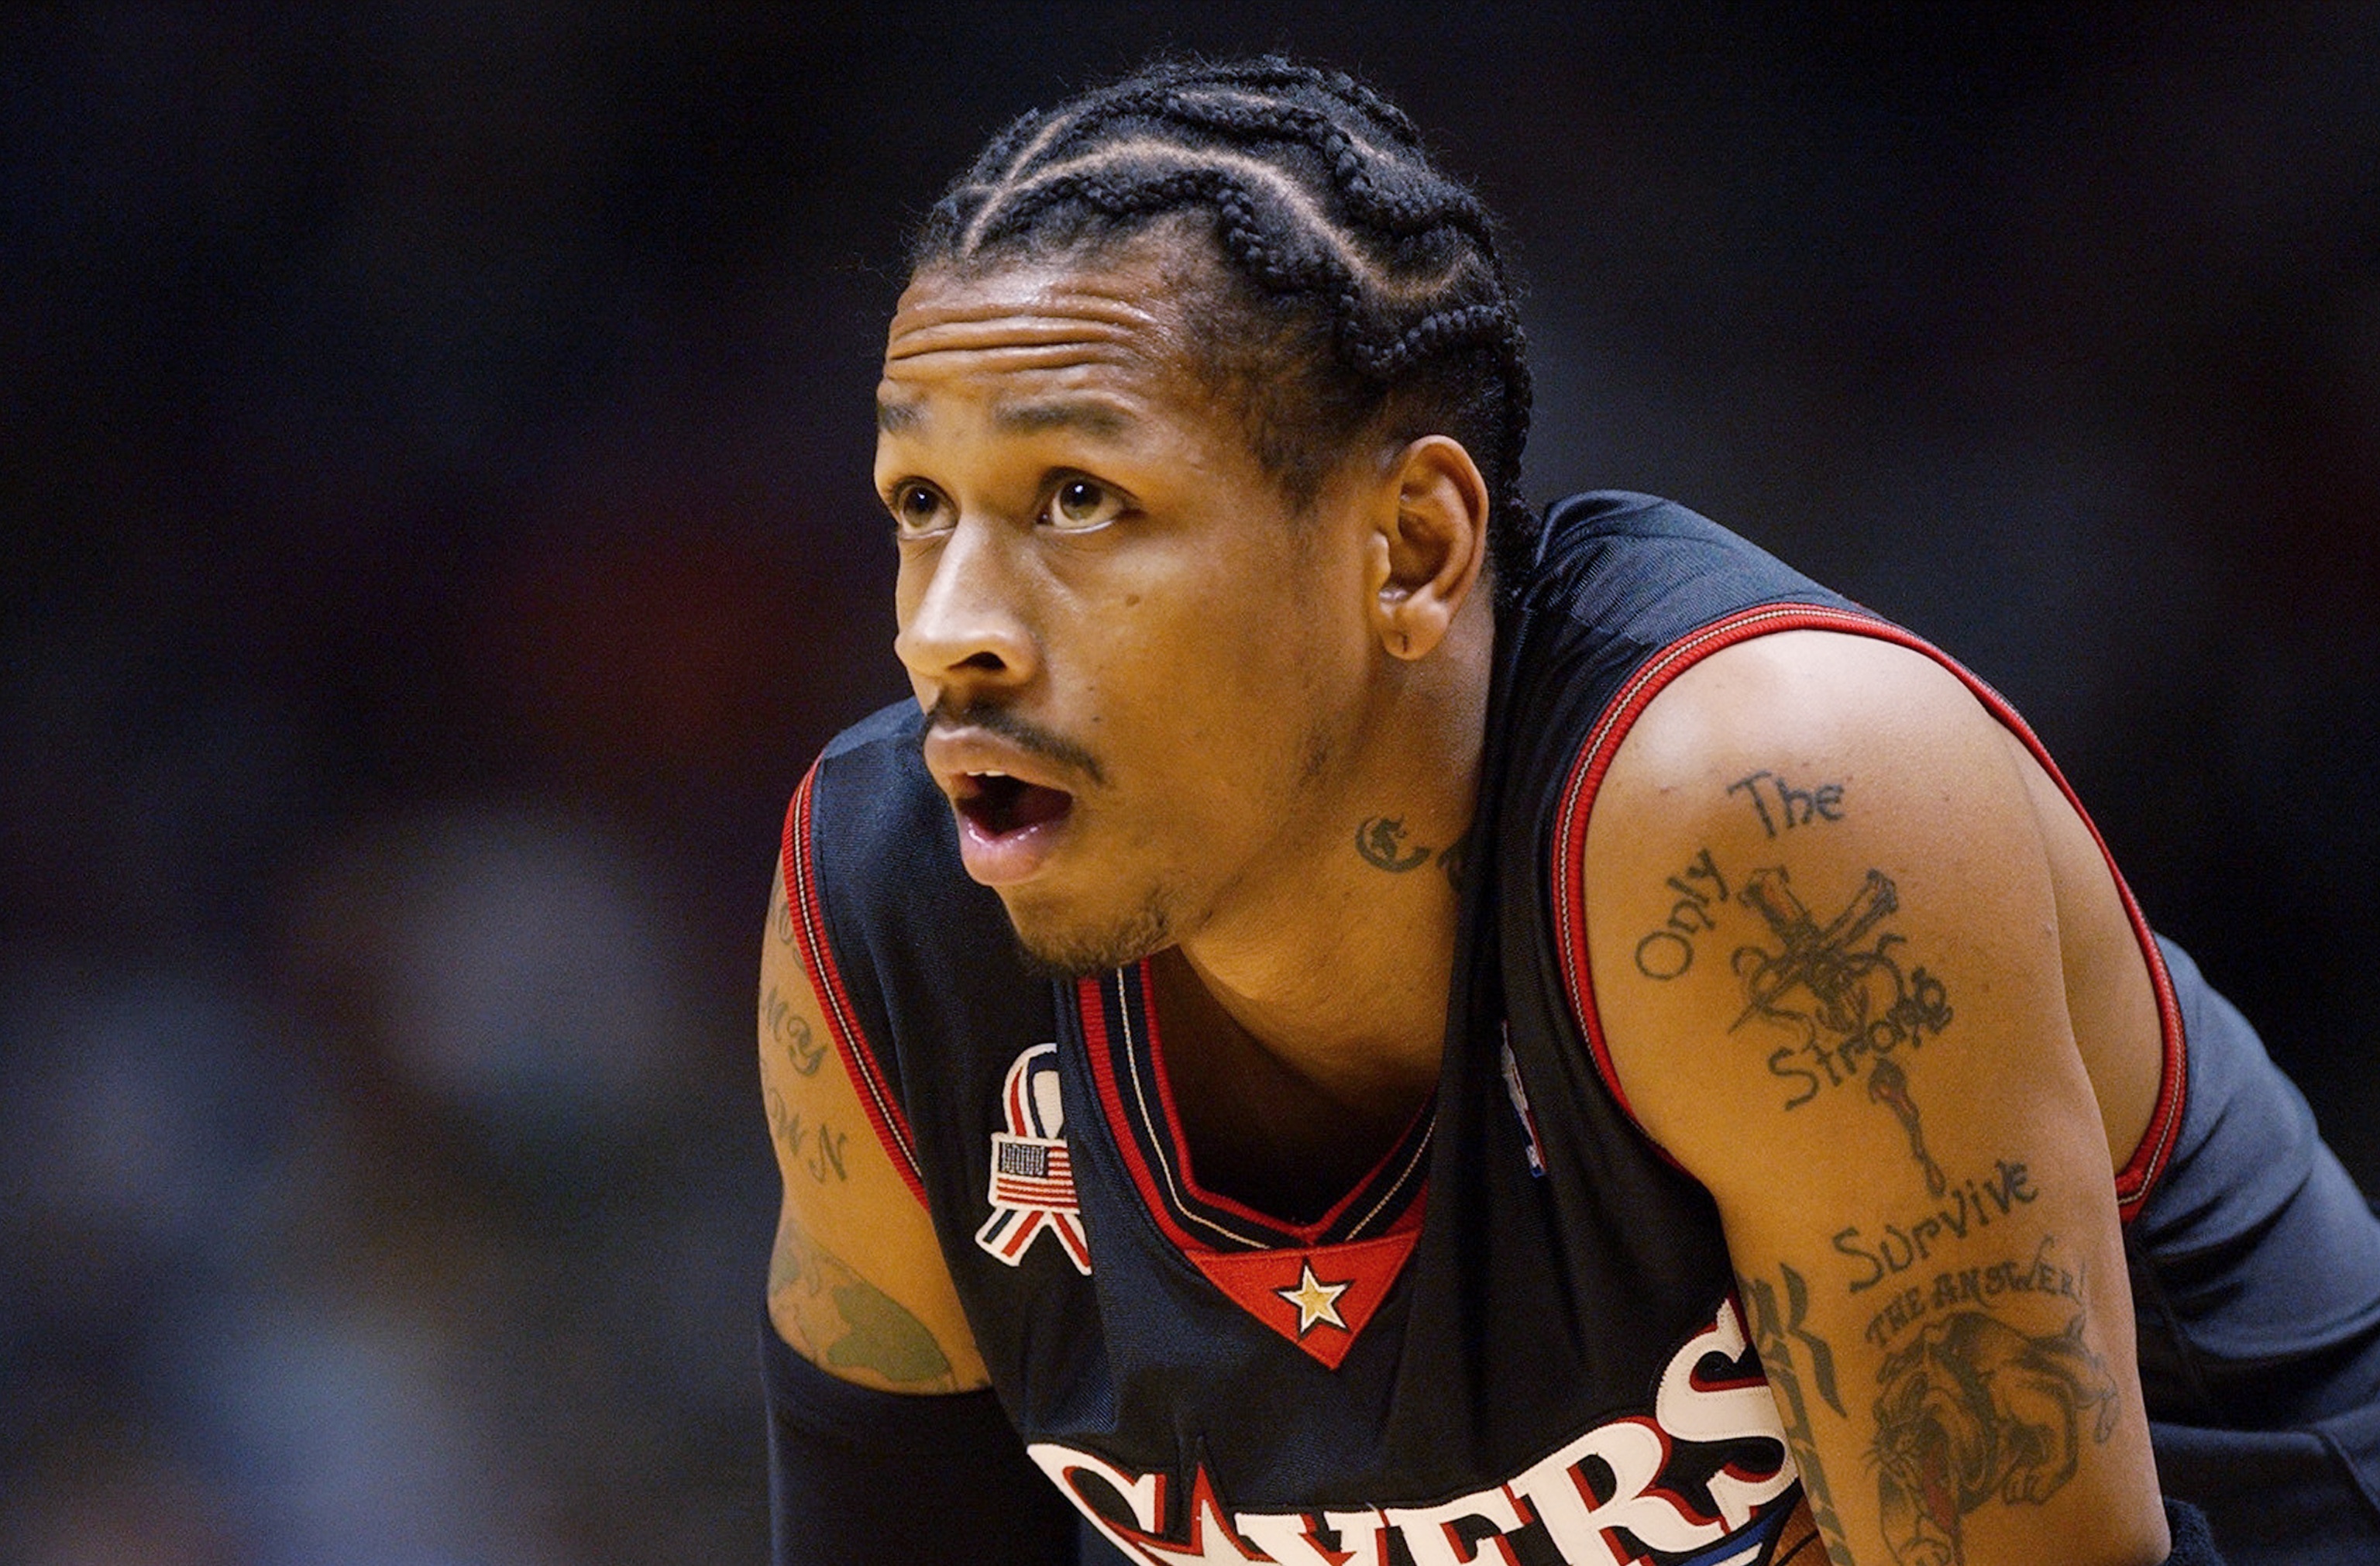 5 ways Allen Iverson was ahead of his time - FanSided3072 x 2021